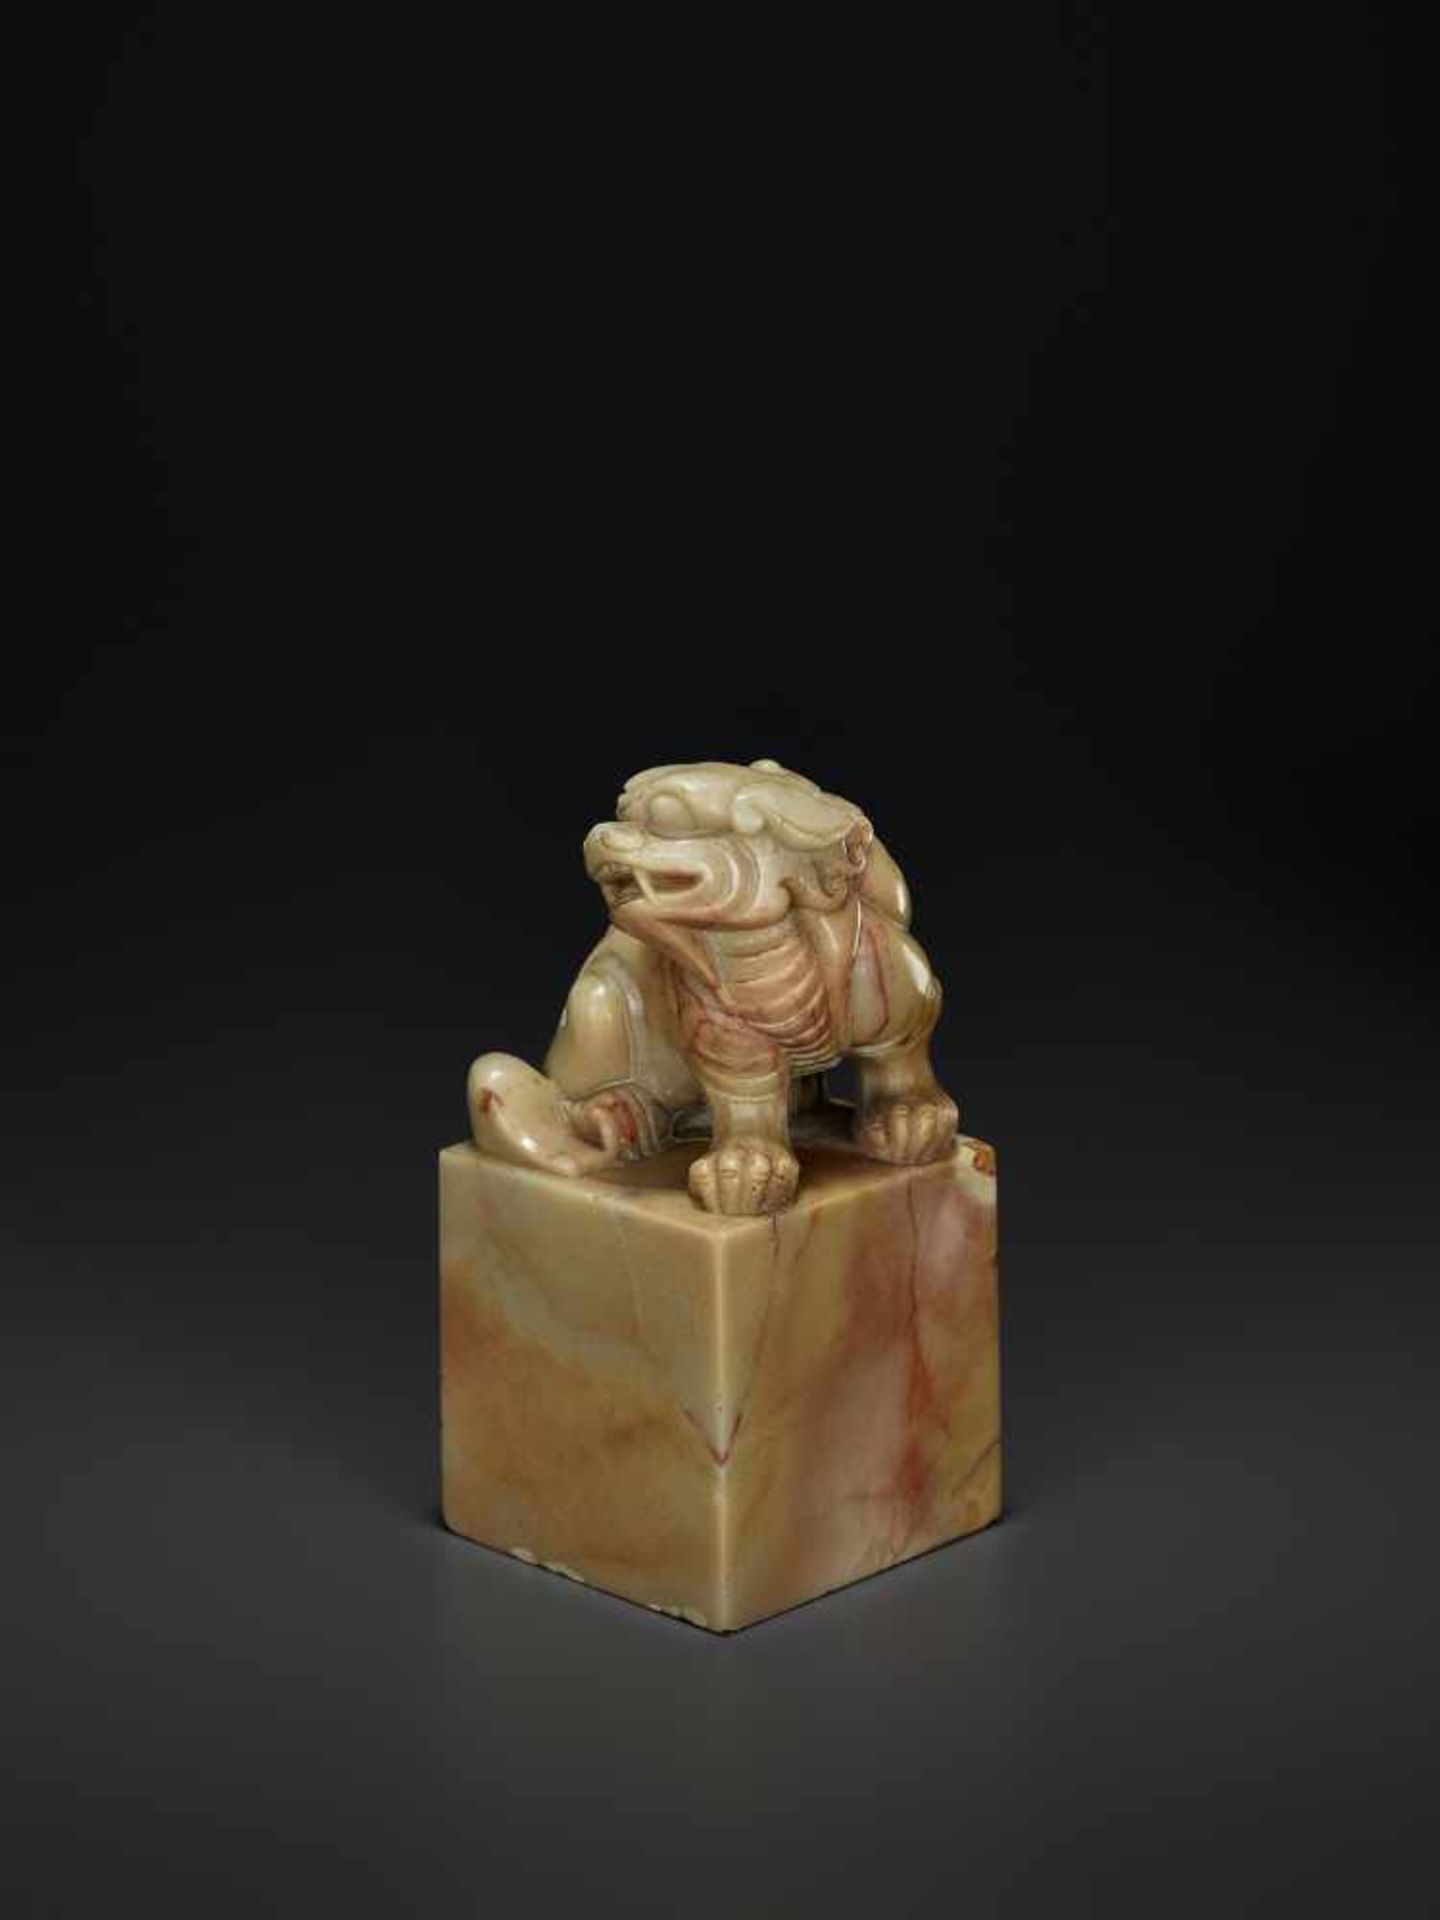 A LARGE SOAPSTONE SEAL, QINGChina, 1780-1860. Openwork carving with a Buddhist lion sitting on a